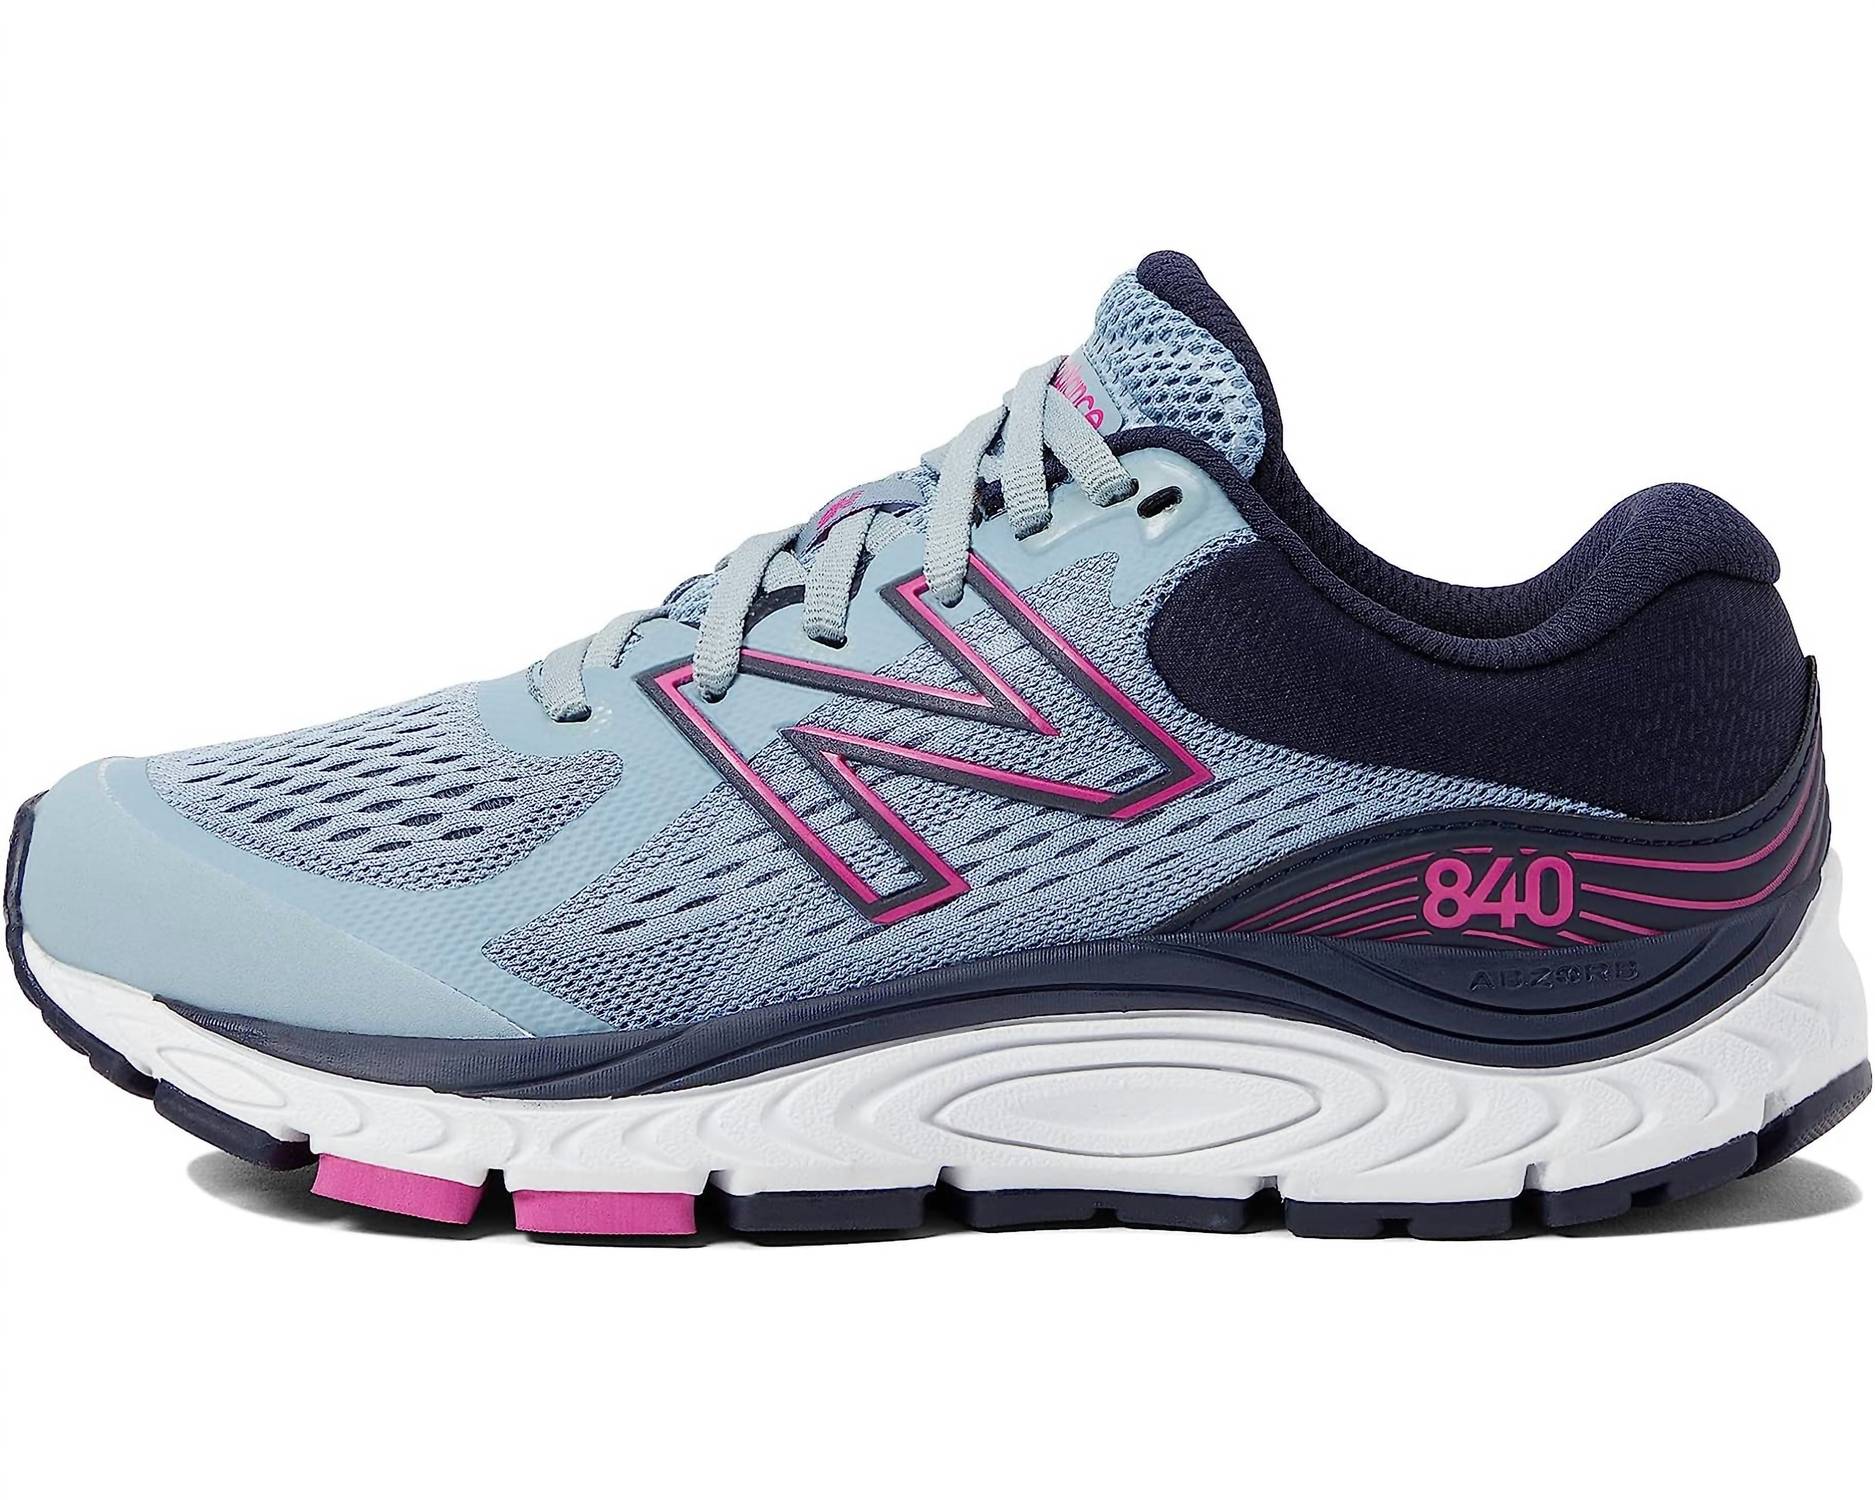 New Balance Women's 840V5 Athletic Shoe In Cyclone/eclipse/magenta Pop US 11 female